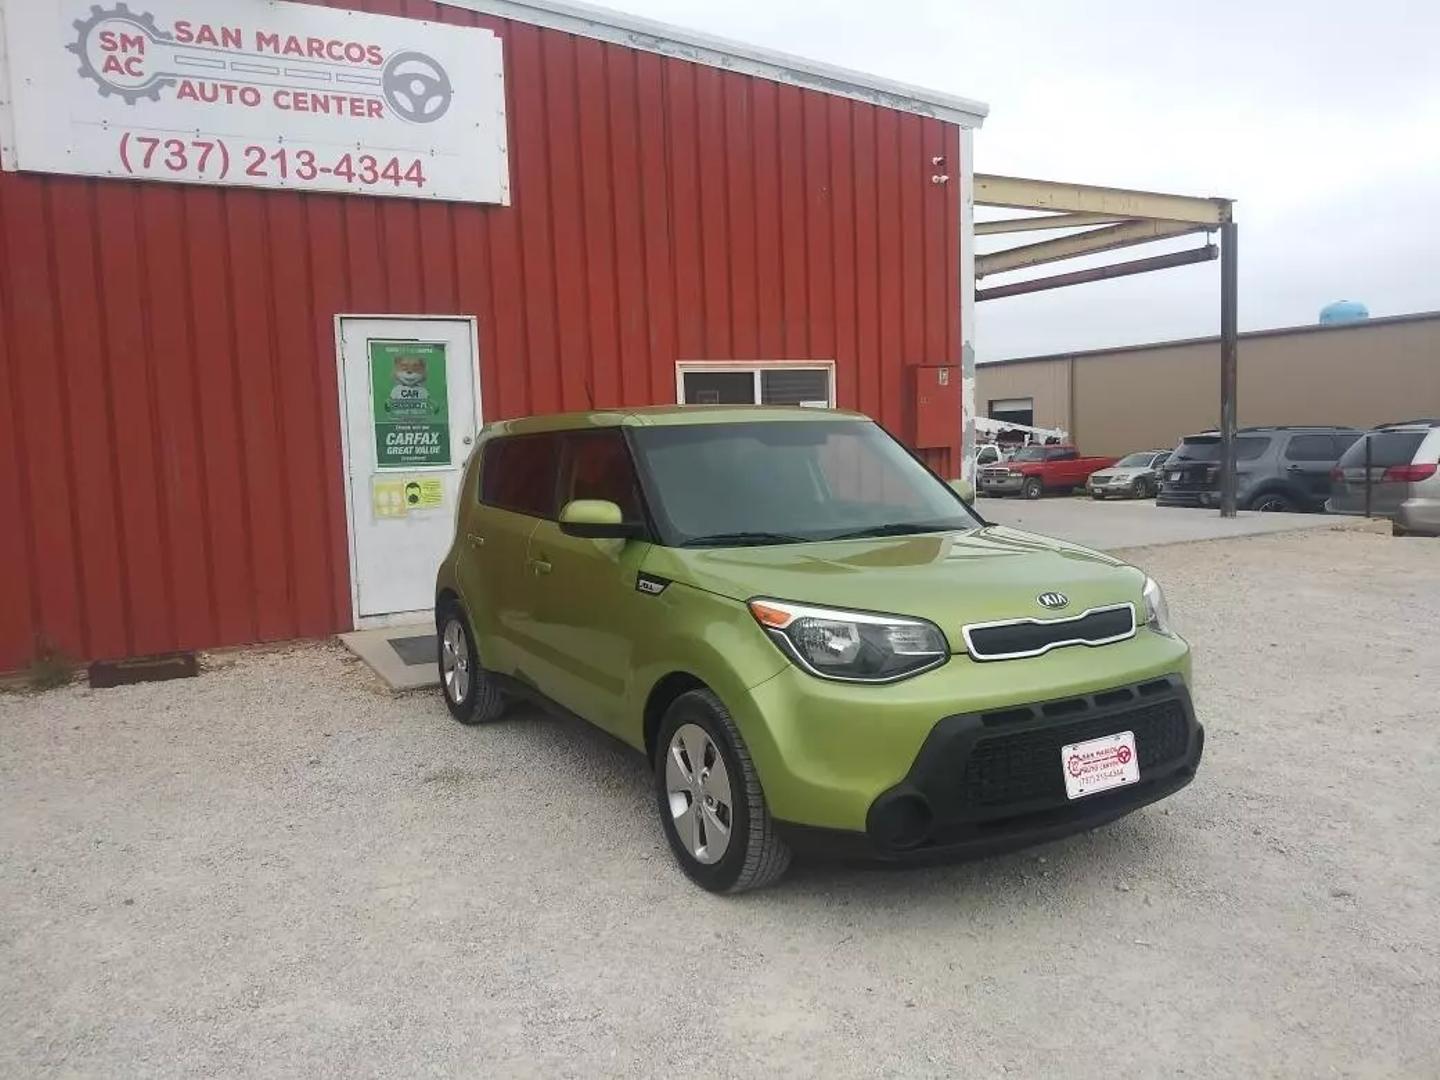 USED KIA SOUL 2016 for sale in San Marcos, TX San Marcos